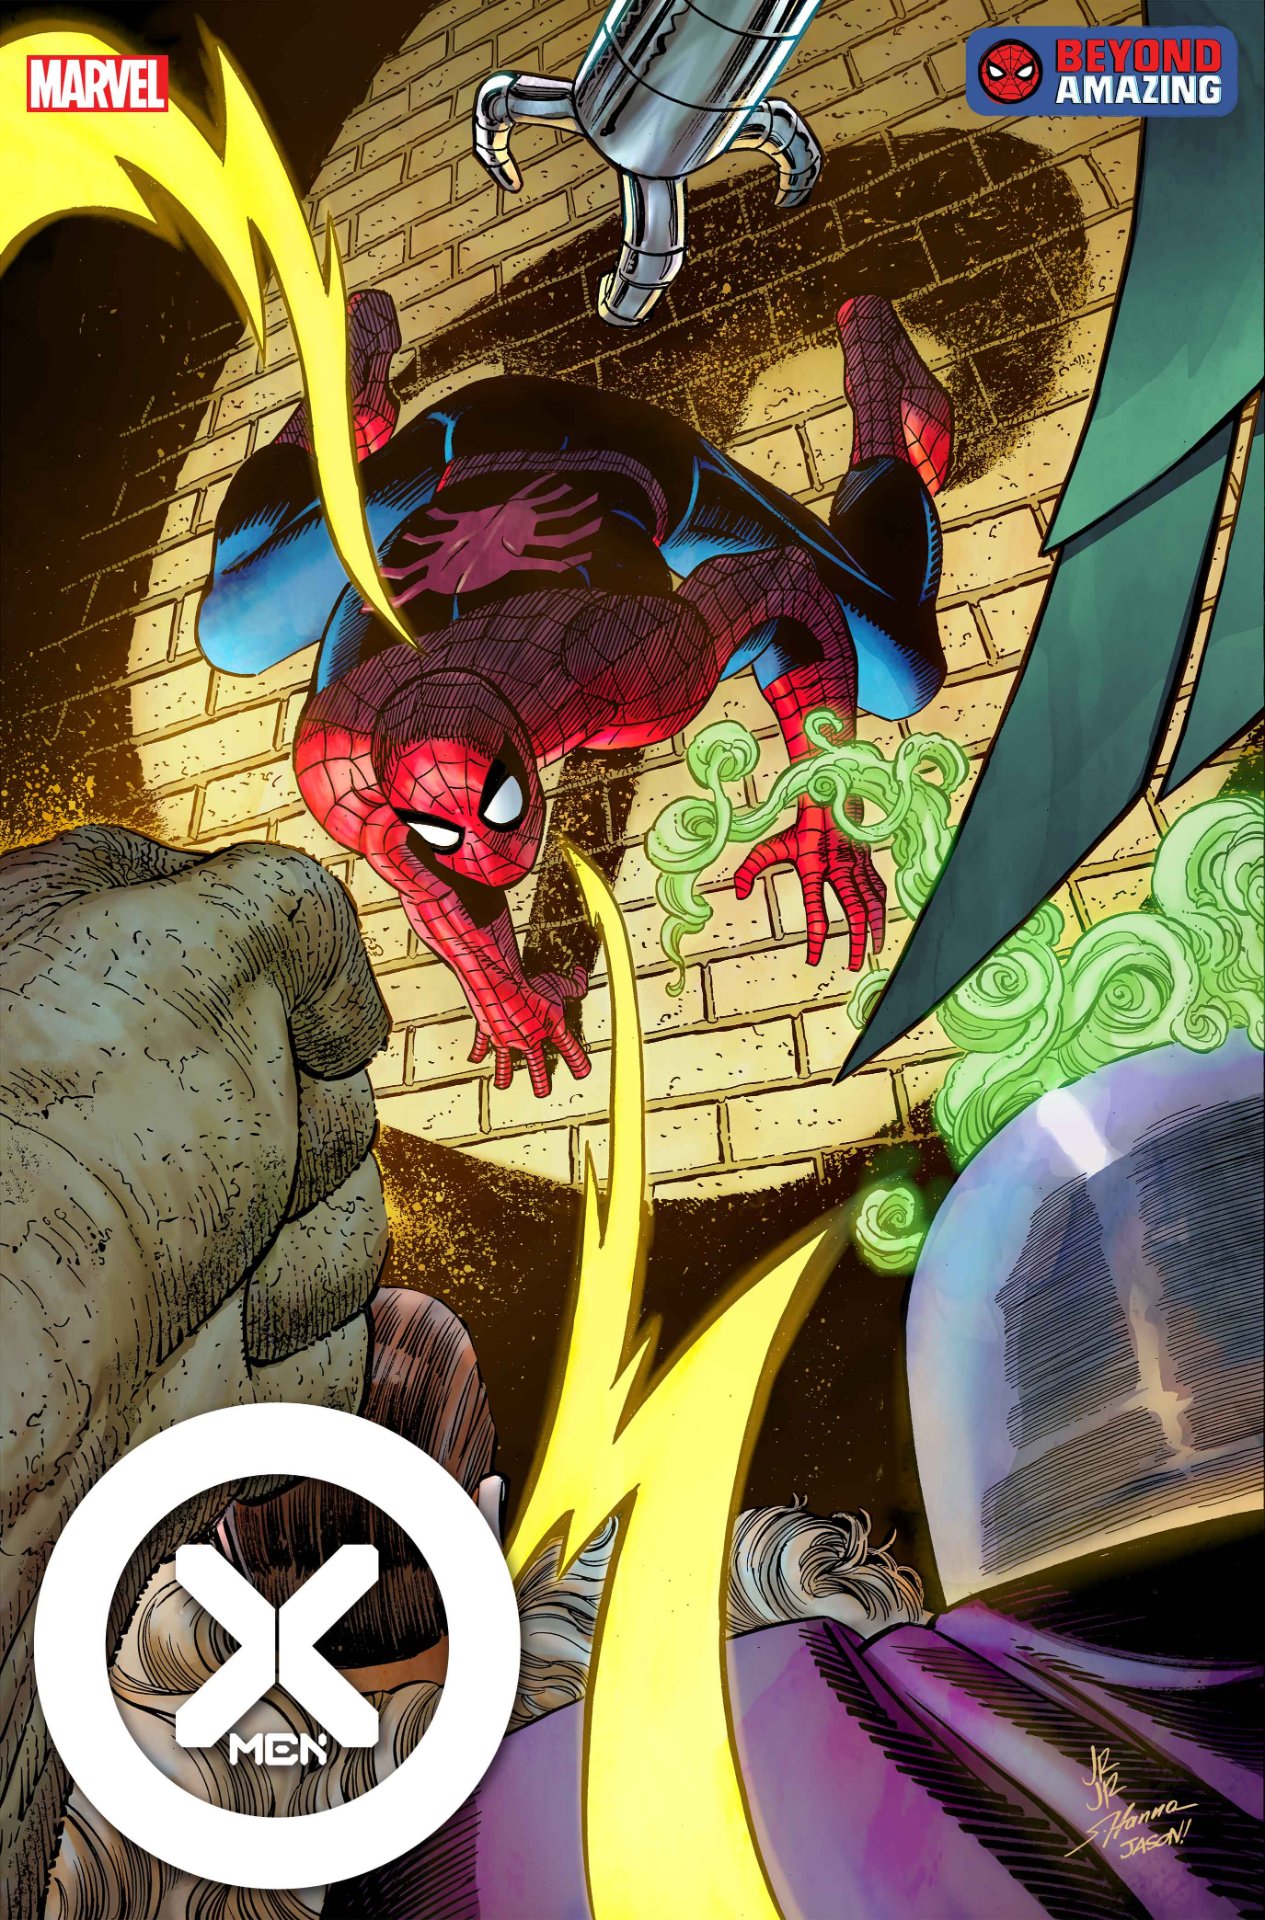 Spider-Man’s 60th anniversary Beyond Amazing variant covers